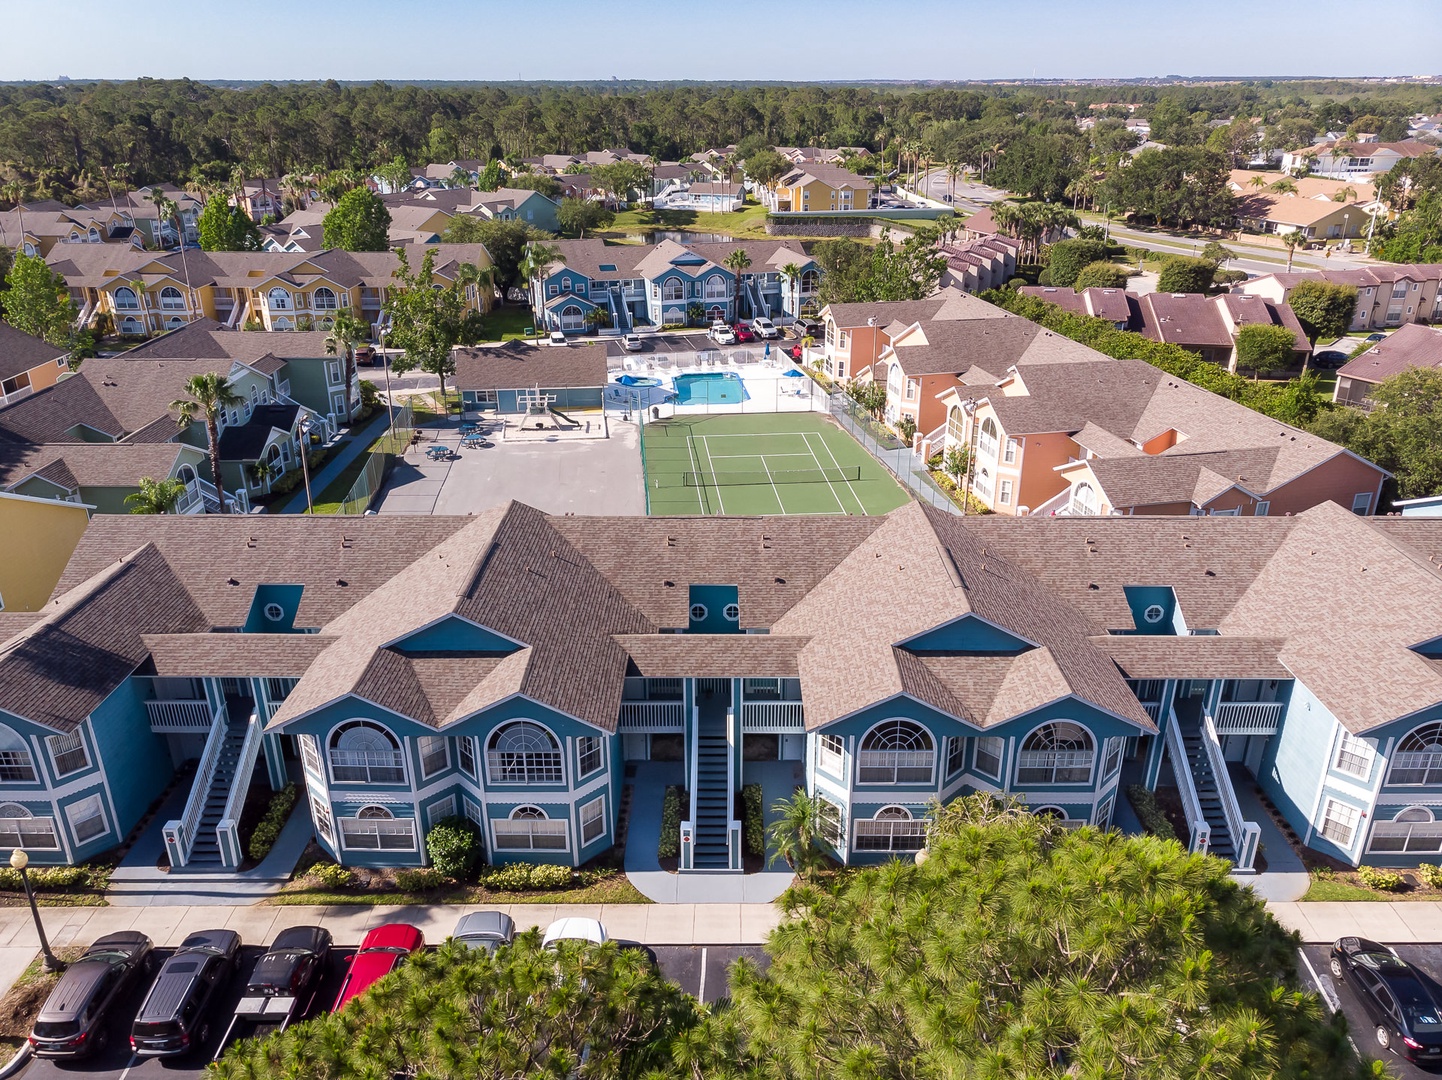 Aerial view of your home close to pool